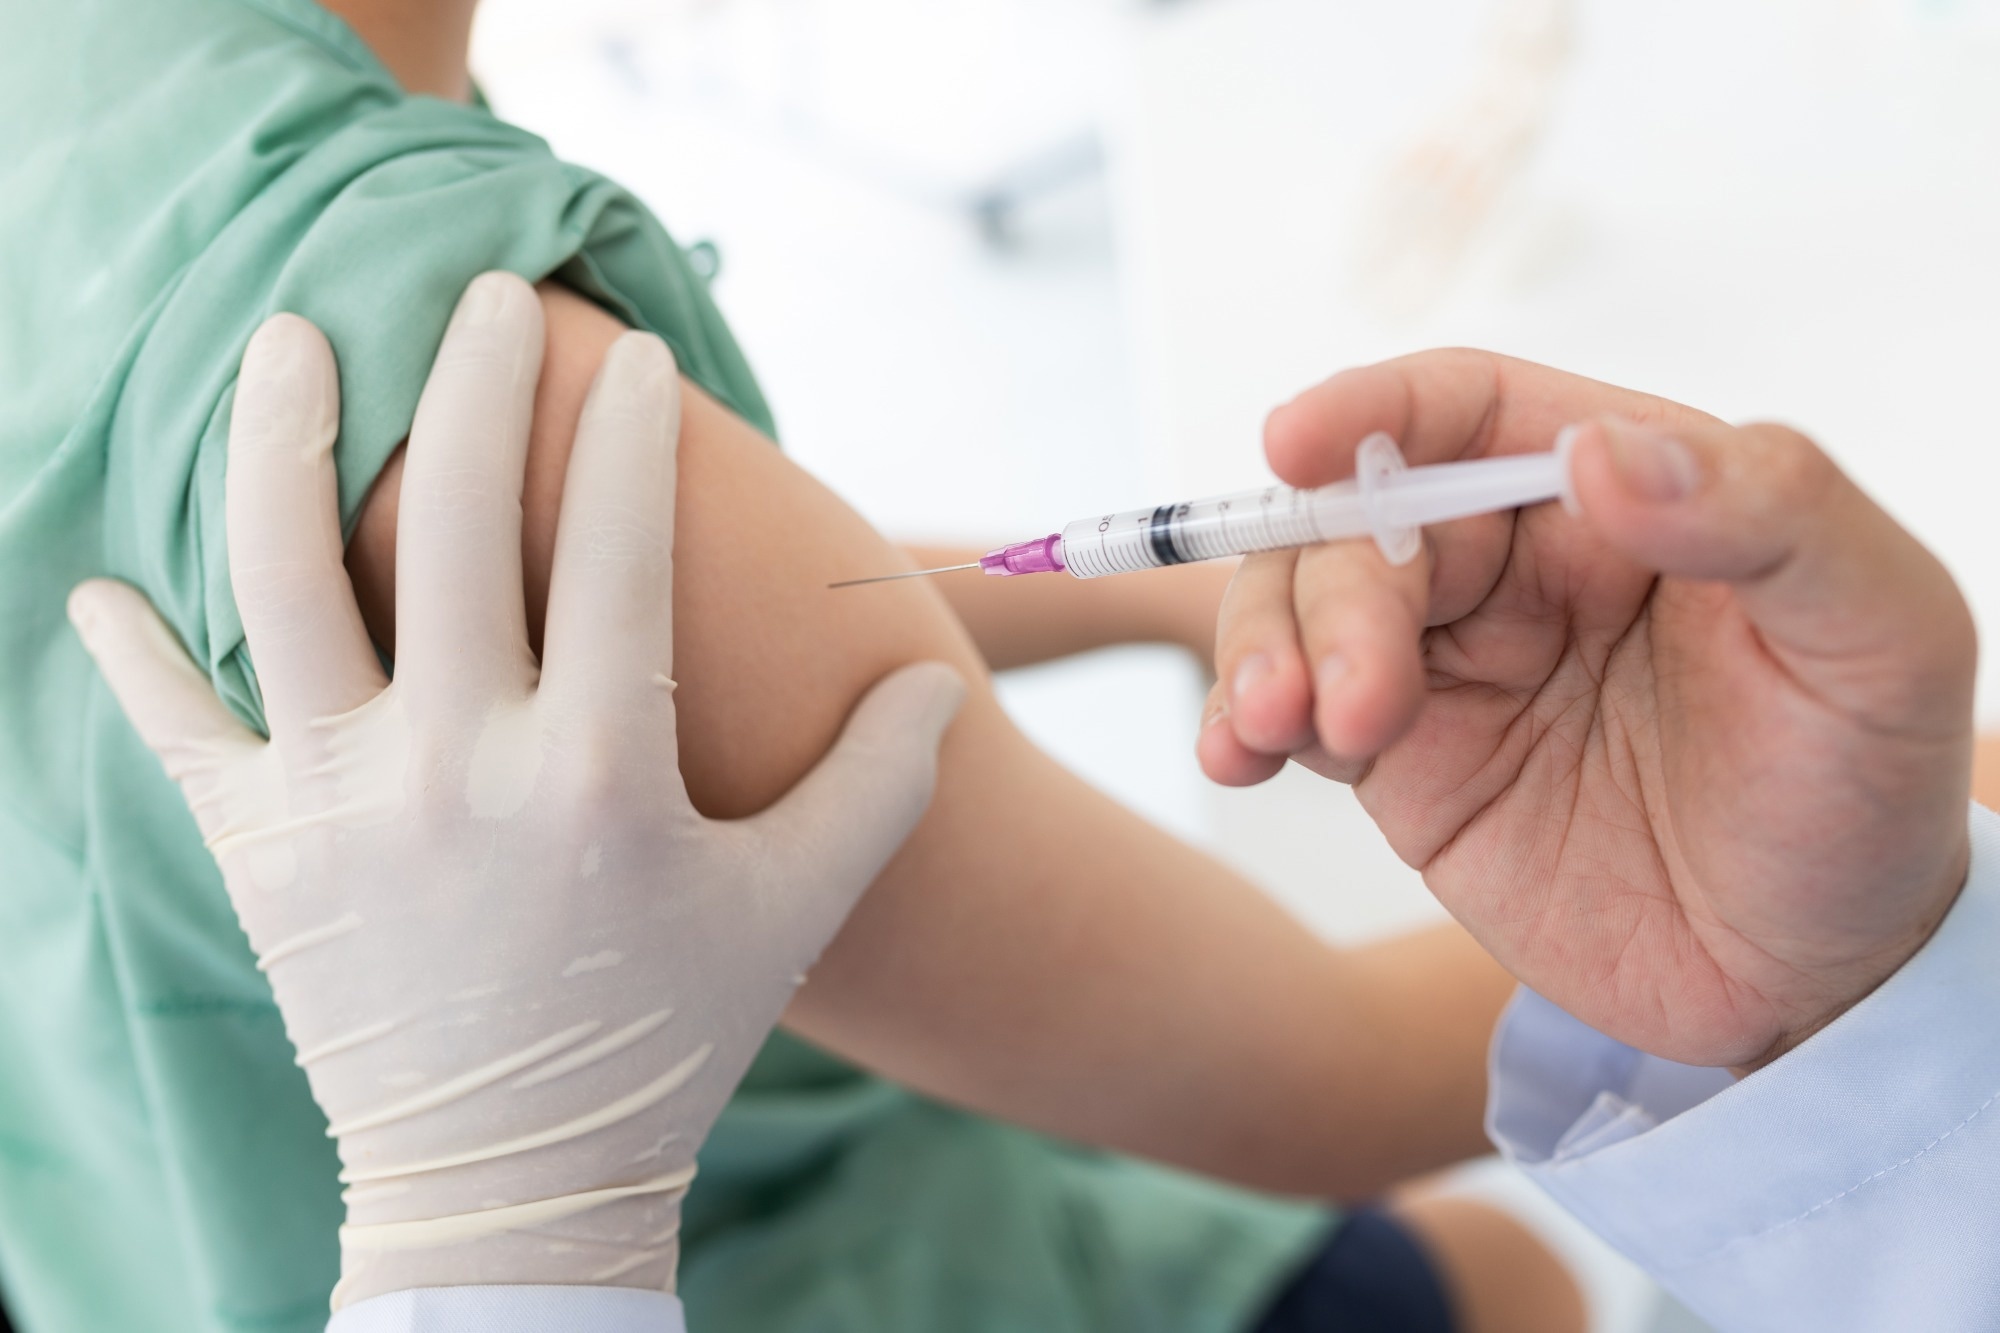 Study: COVID-19 vaccine antibody response is associated with side-effects, chronic health conditions, and vaccine type in a large Northern California cohort. Image Credit: Tong_stocker/Shutterstock